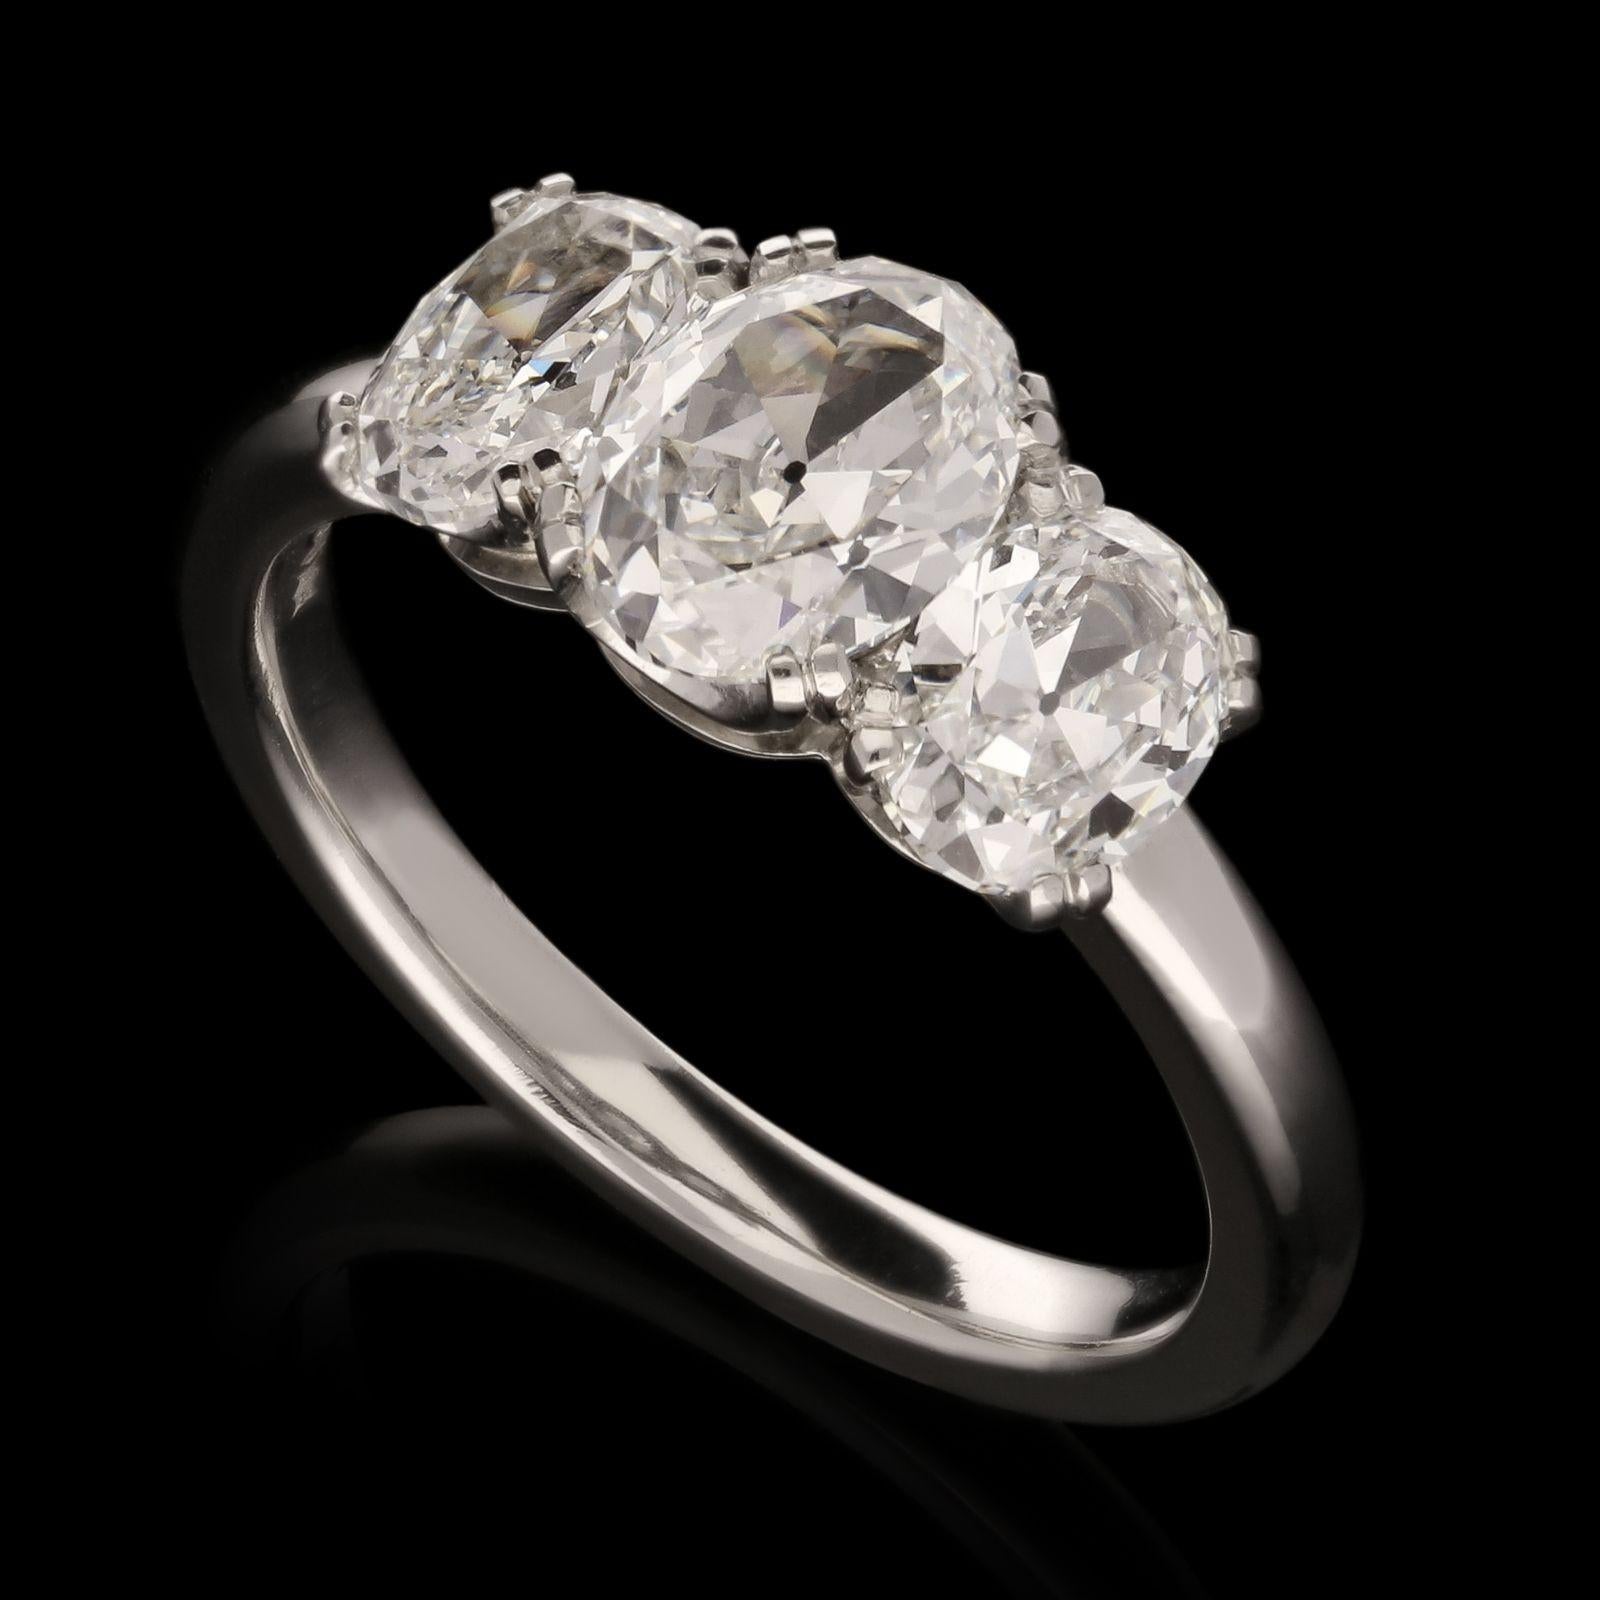 A classic diamond and platinum three stone ring by Hancocks, set to the centre with an oval brilliant cut diamond weighing 0.94cts and of F colour and VS2 clarity between two further oval brilliants of 0.54cts F colour and VS1 clarity and 0.52cts